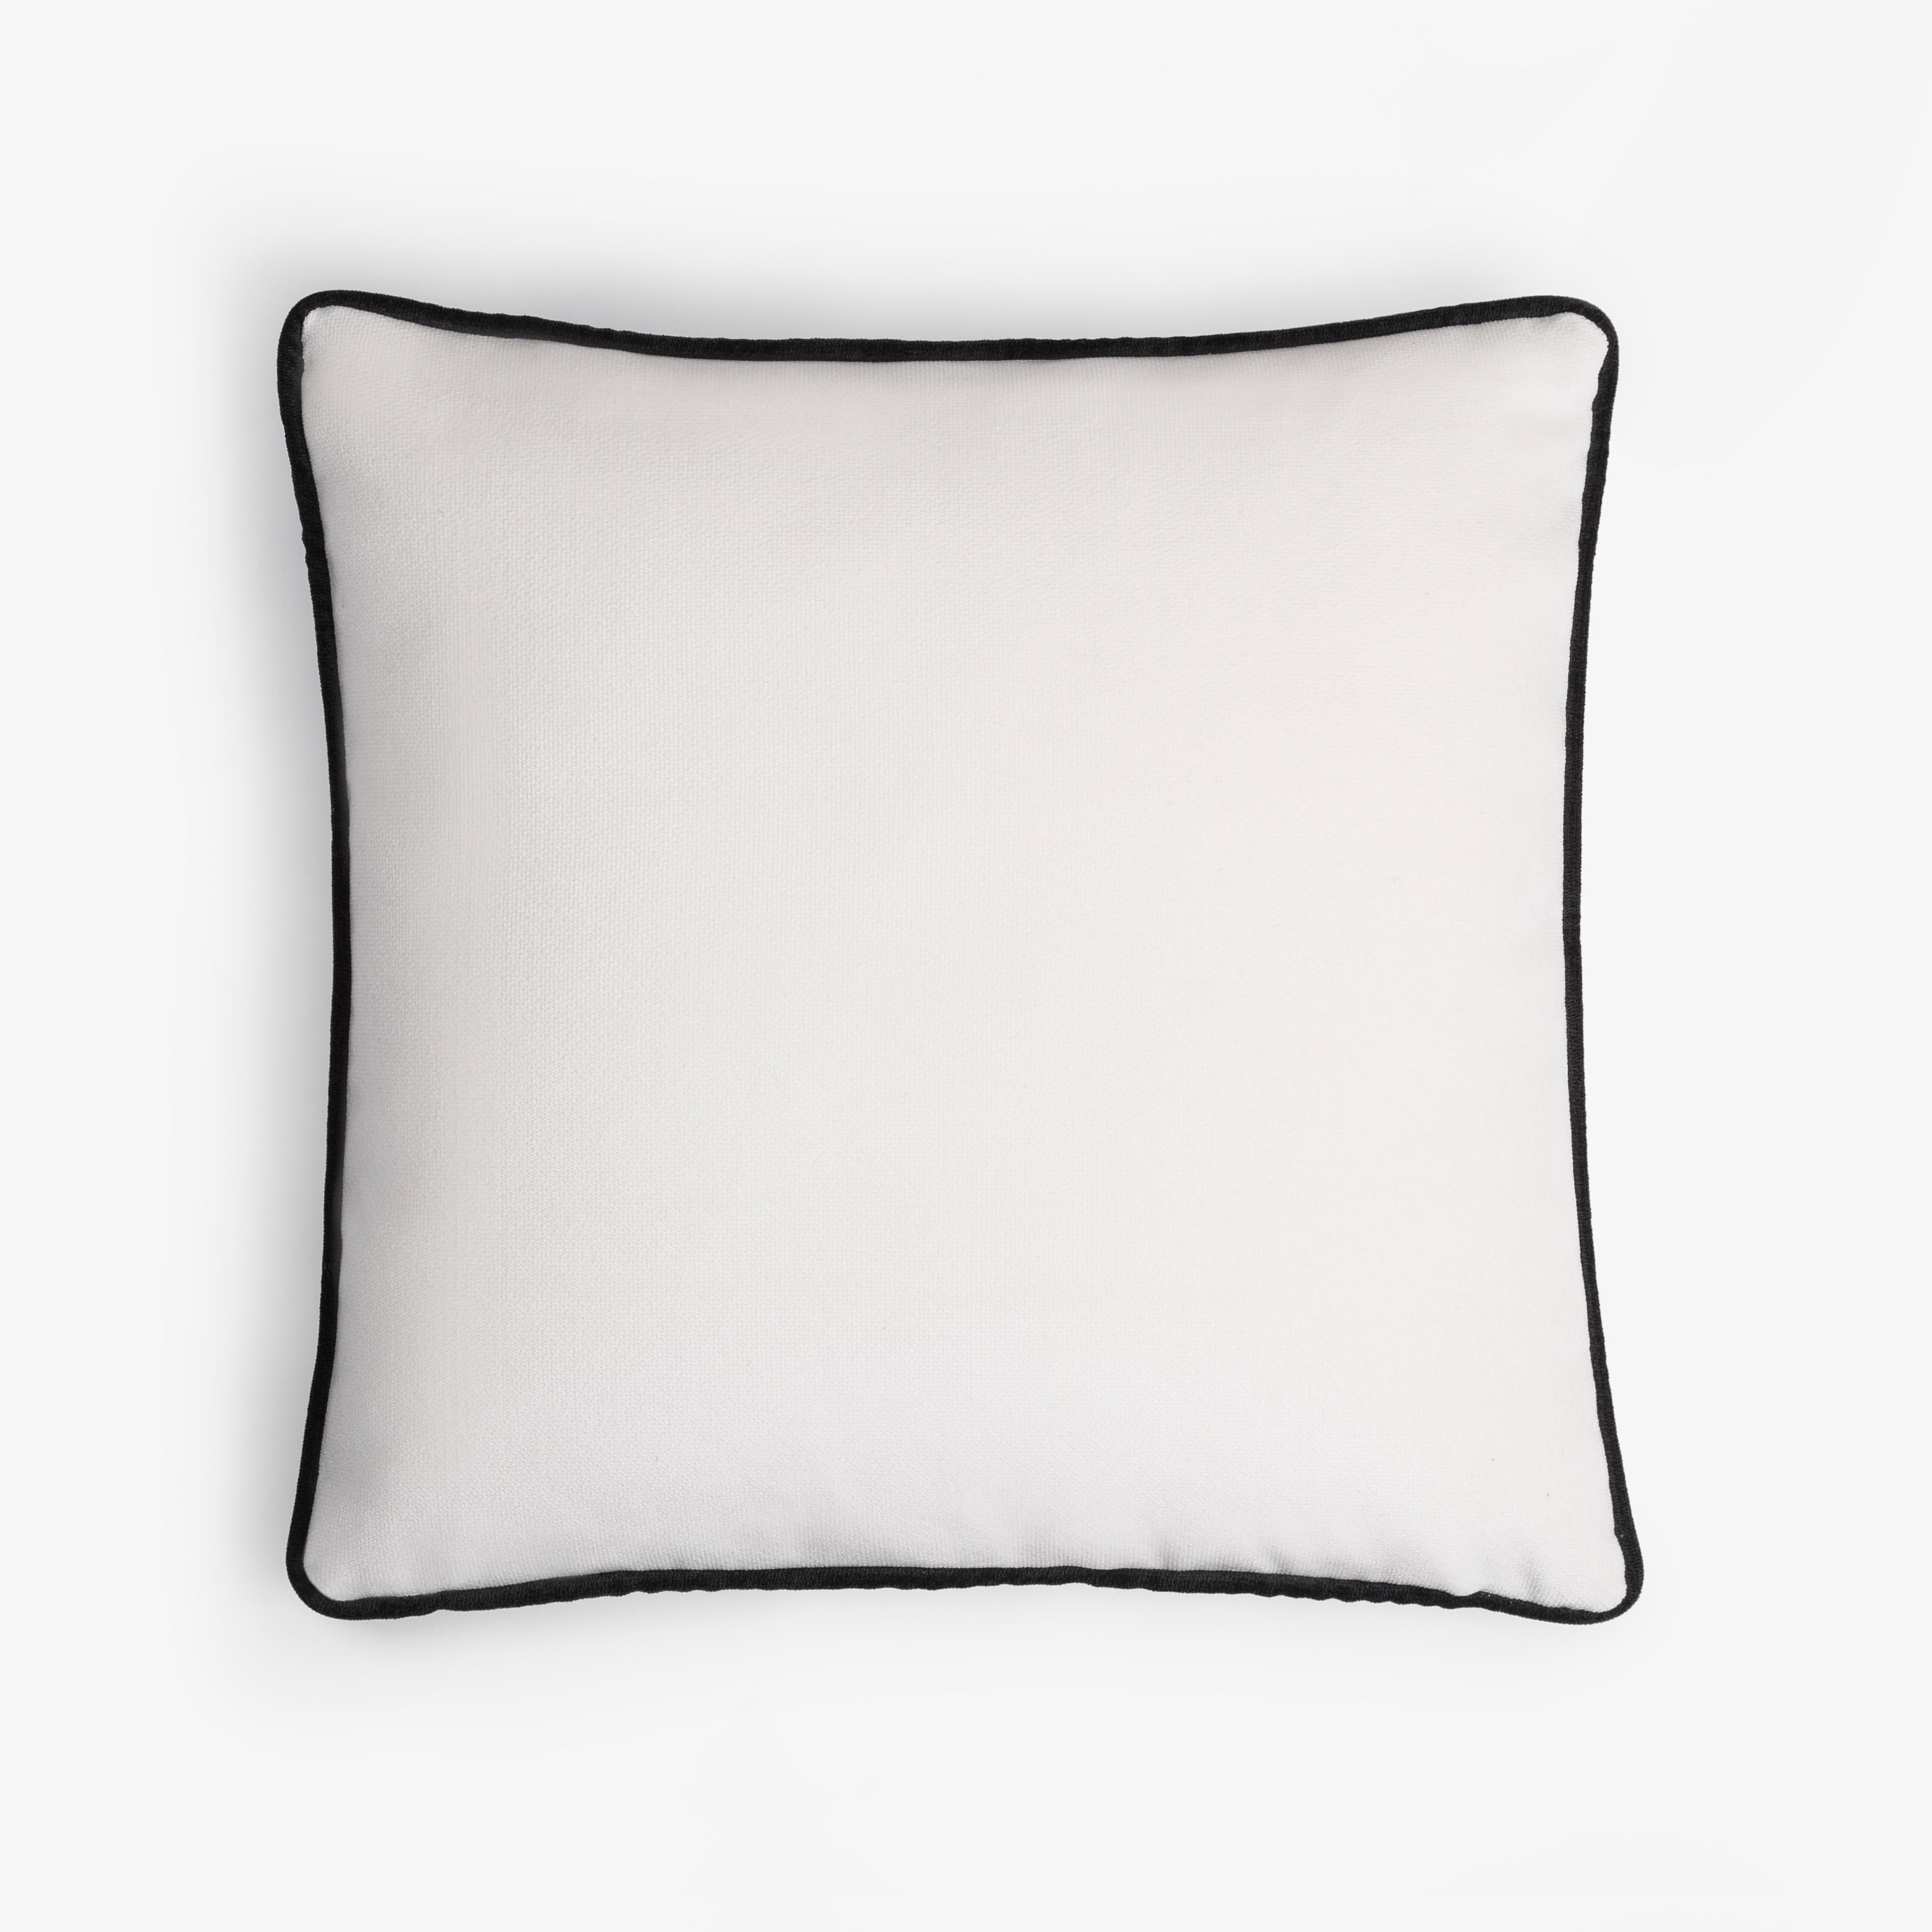 Hand-Crafted Happy Pillow White Velvet with Black Fringes  For Sale